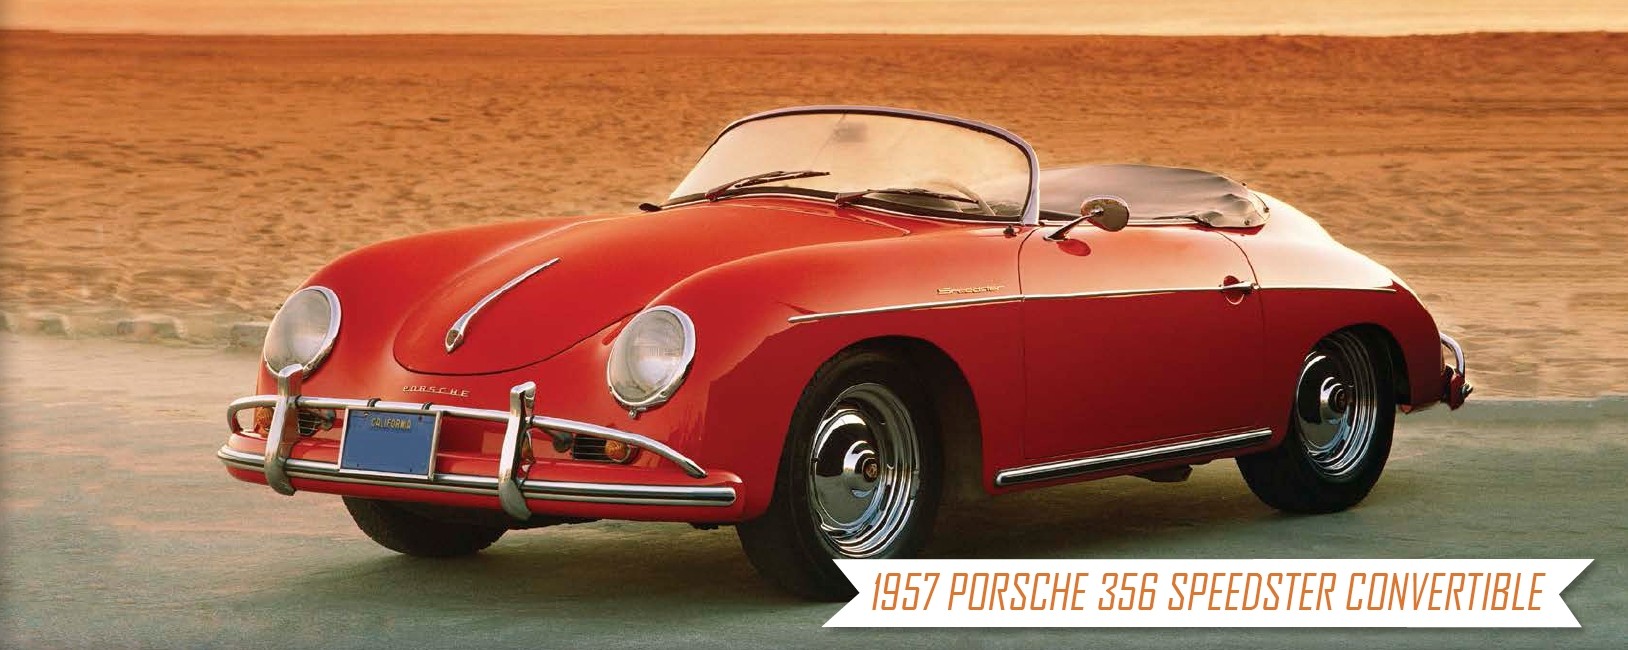 BY THE END OF 1955 PORSCHE HAD PRODUCED MORE THAN 7600 OF THE PORSCHE 356 In - photo 7